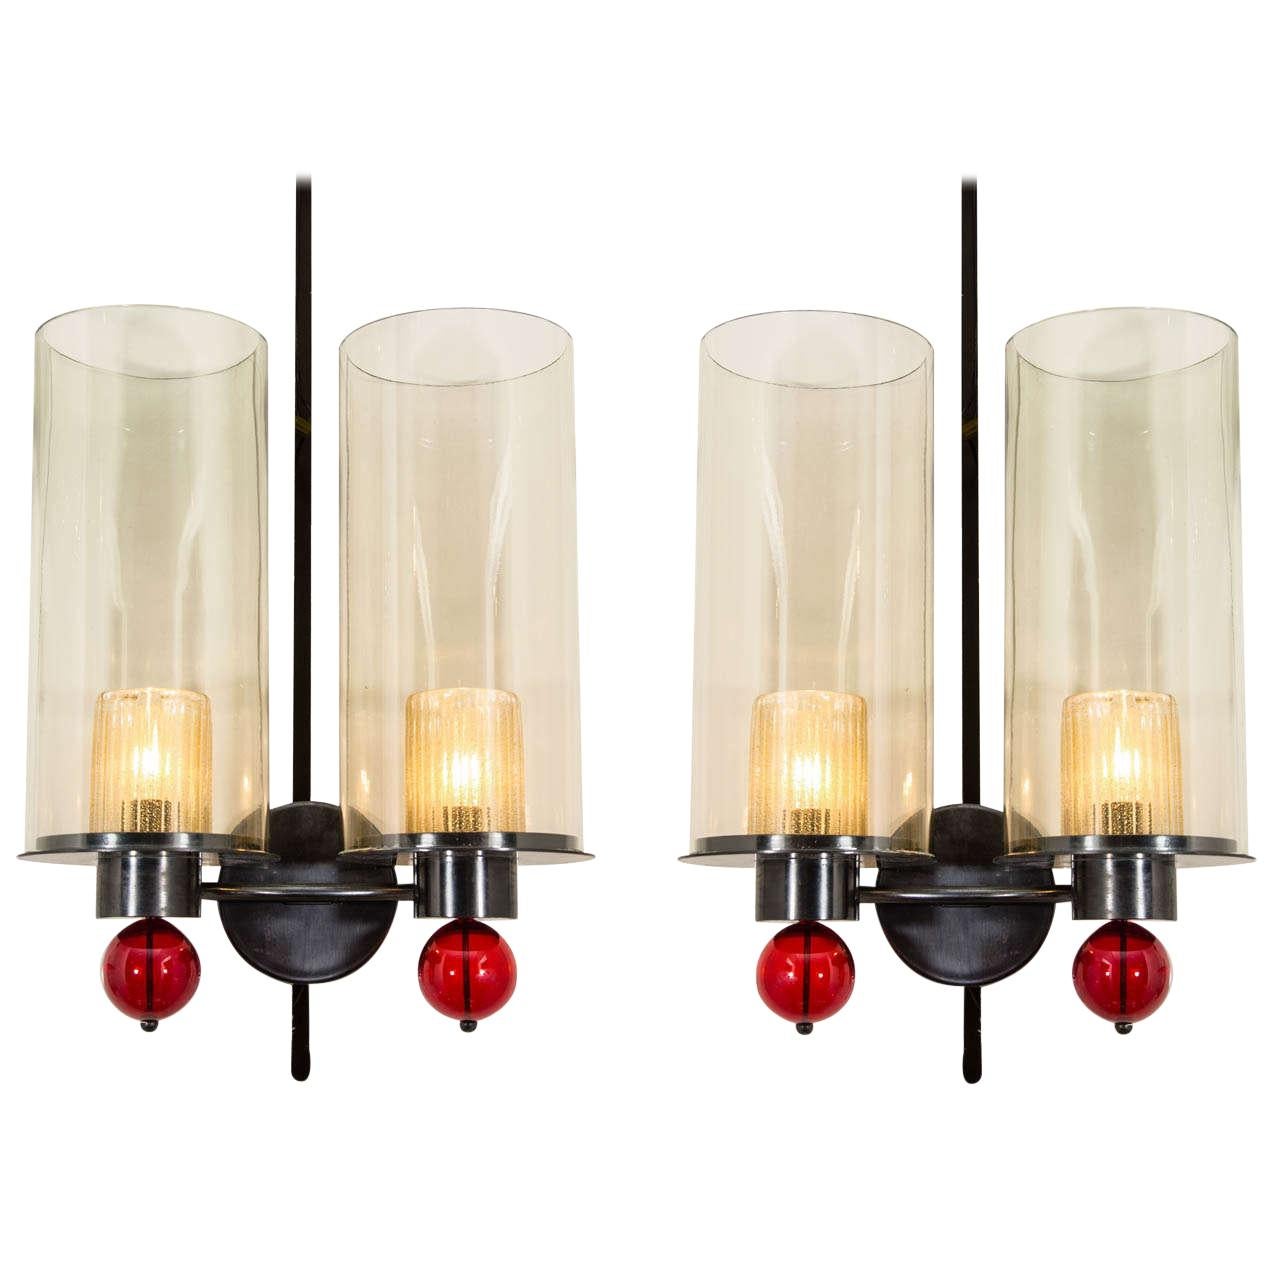 Pair of Midcentury Sconces For Sale